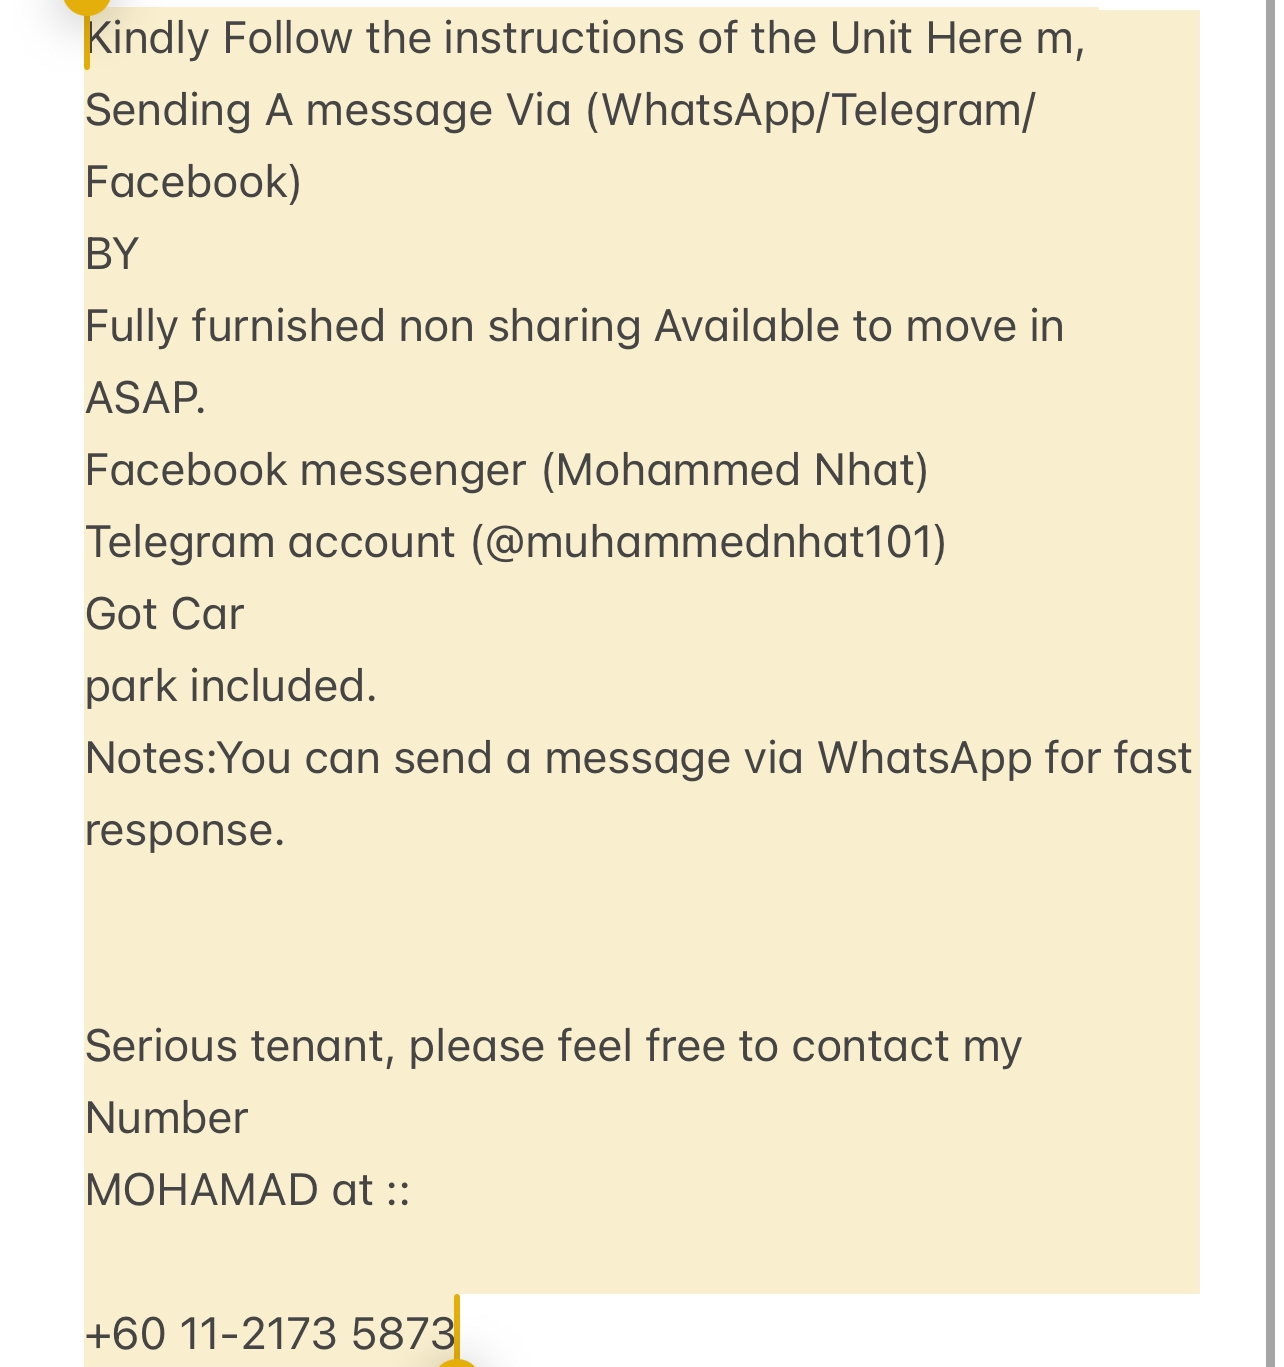 room for rent, master room, azelia road 5, Send the owner a message on WhatsApp/facebook if you want to RENT the unit facebook (Mohammed Nhat)&Telegram(@muhammednhat101) Fully furnished non sharing :(comfortable)